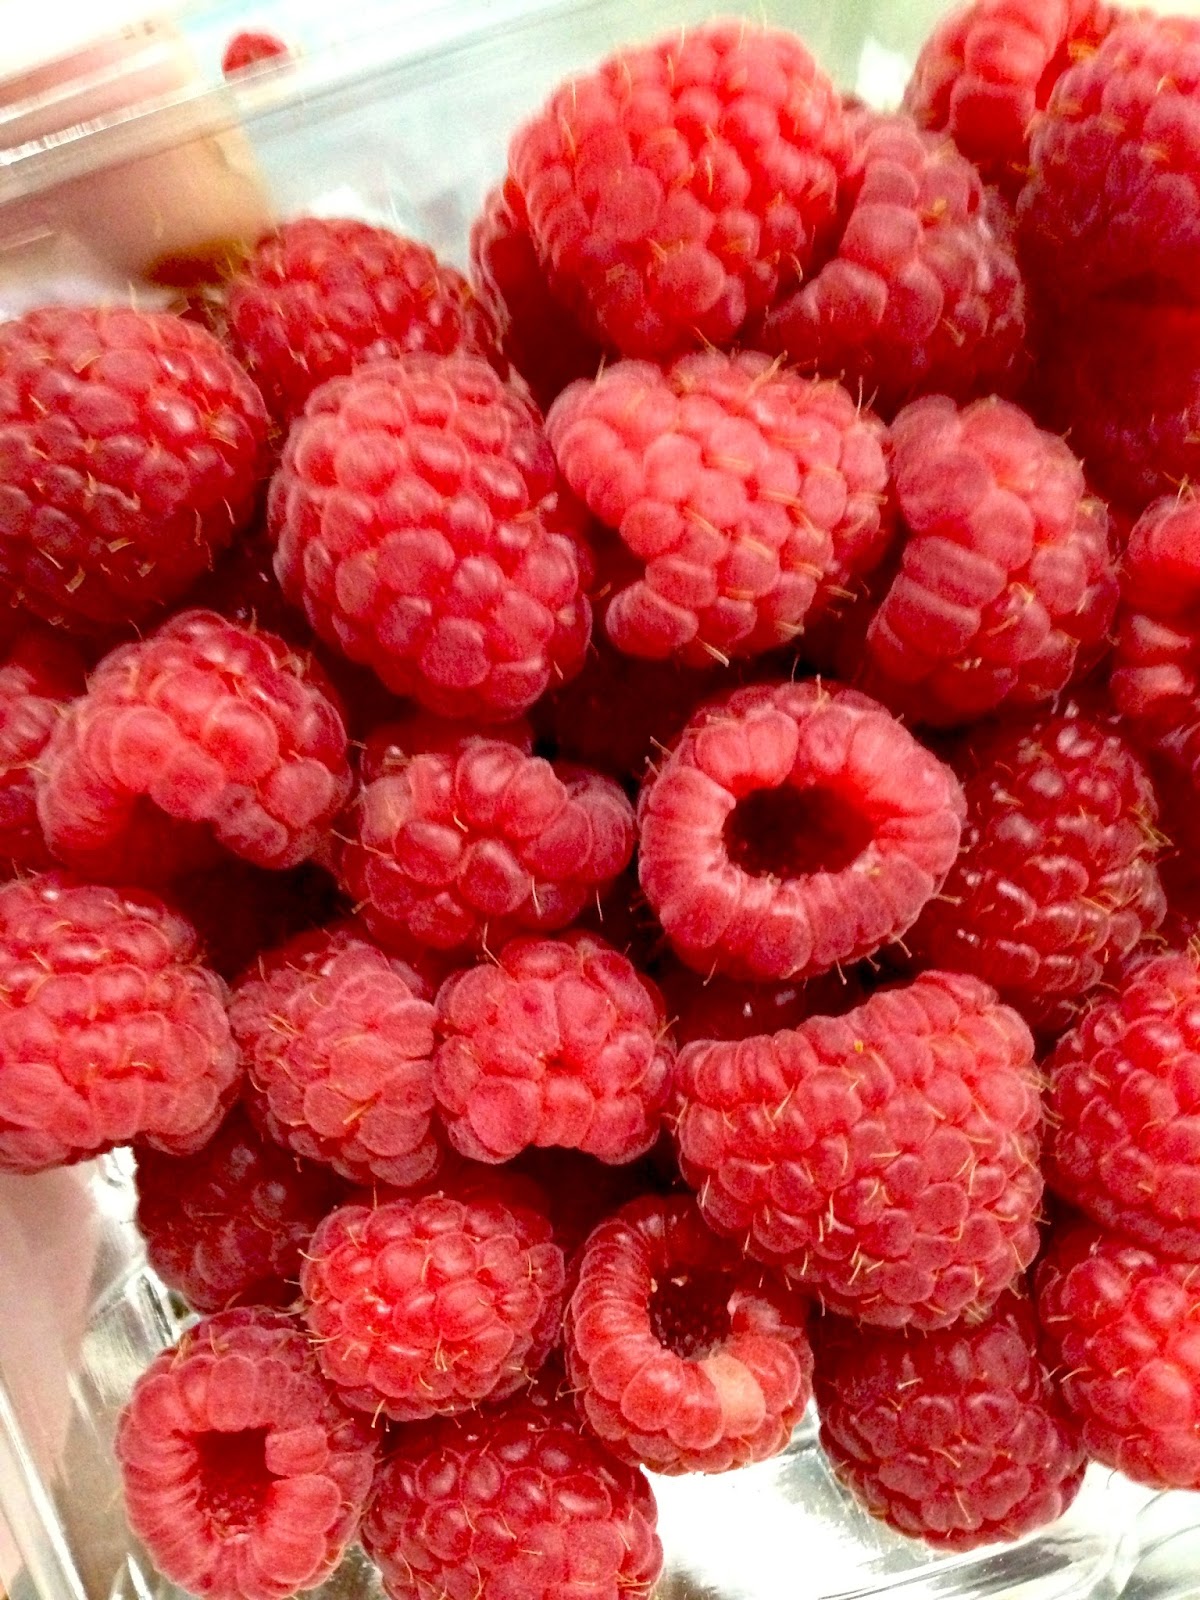 Cooking up a storm: great year for Oregon raspberries